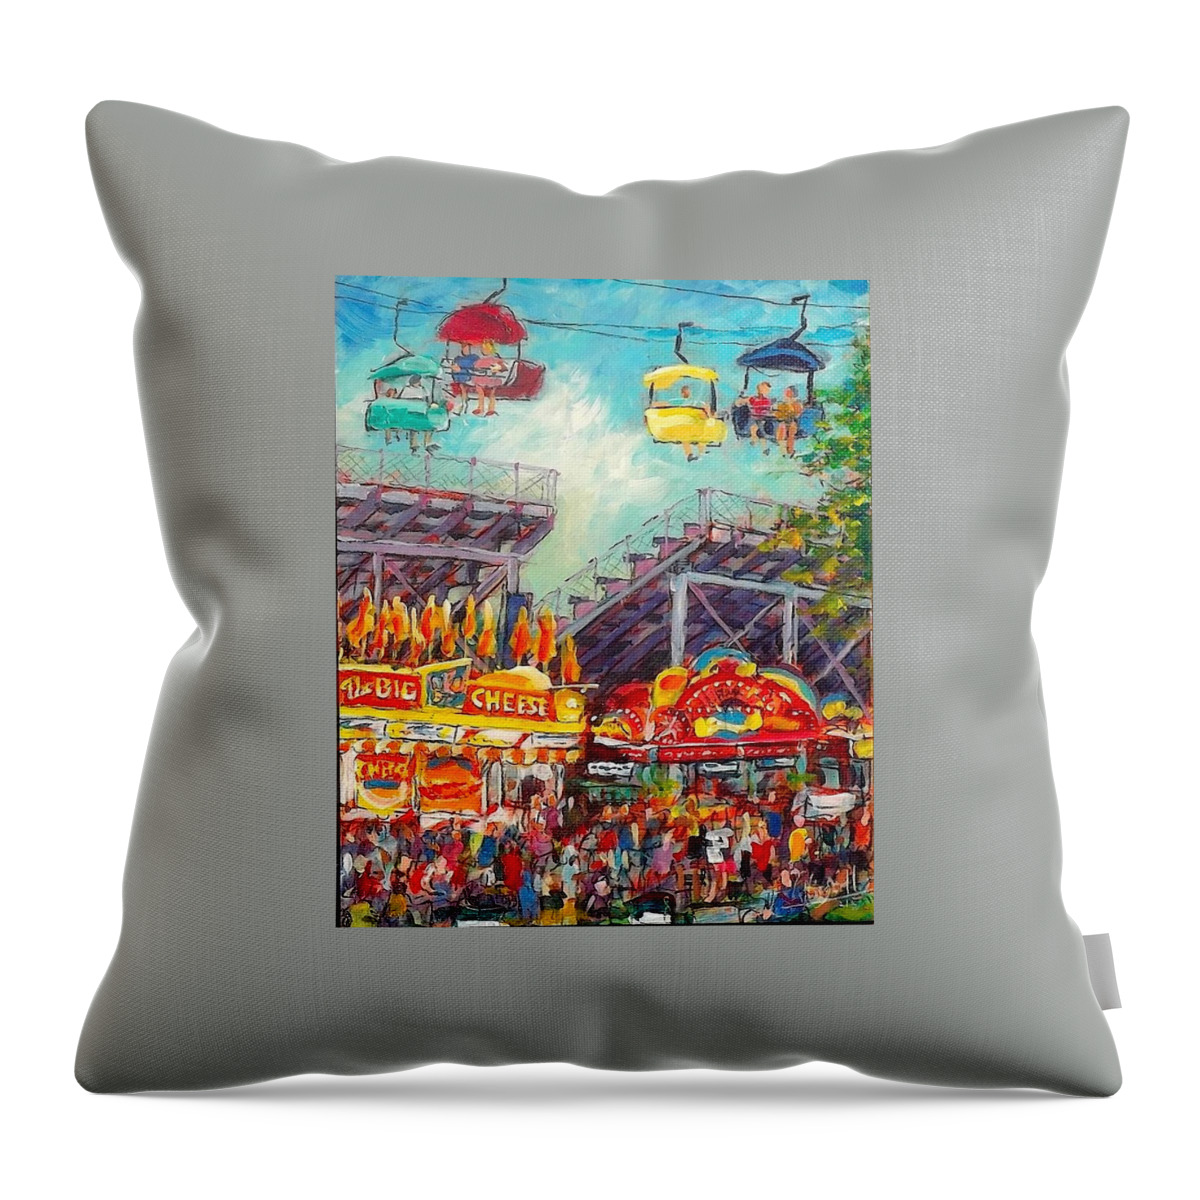 Wisconsin State Fair Throw Pillow featuring the painting The Big Cheese by Les Leffingwell